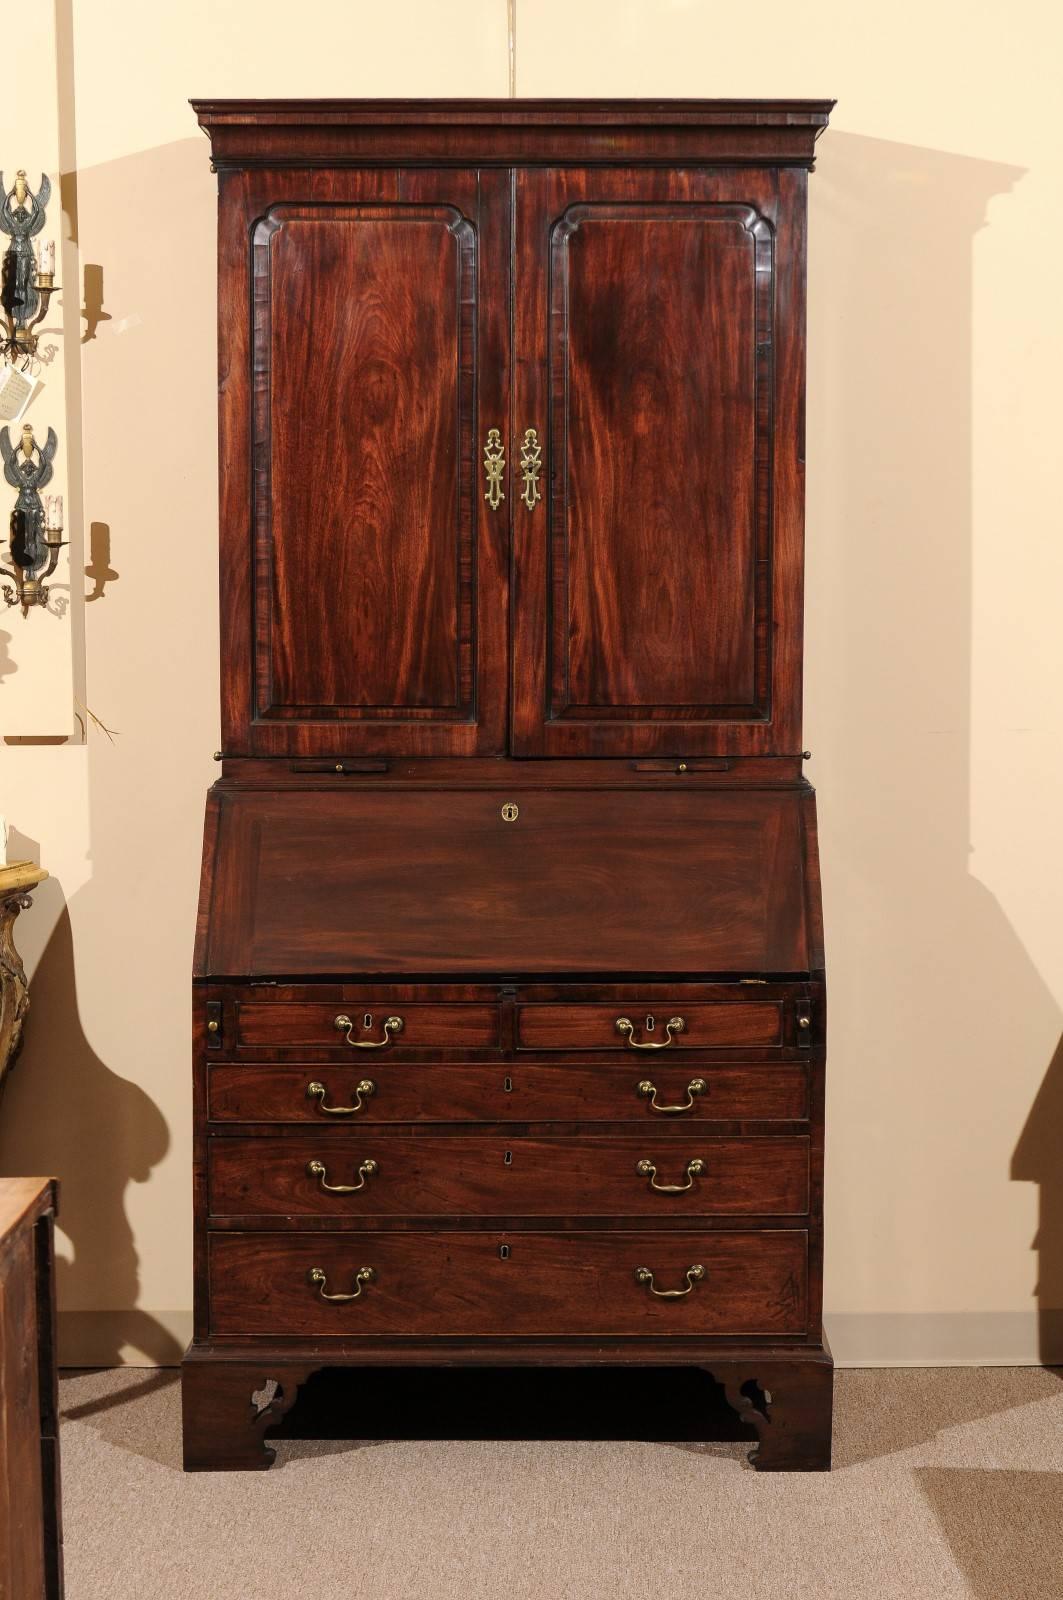 A mid-18th century George II mahogany bureau bookcase with blind panel doors, slant front and bracket feet. The drop front reveals serpentine shaped cubby holes and leather writing surface.
  